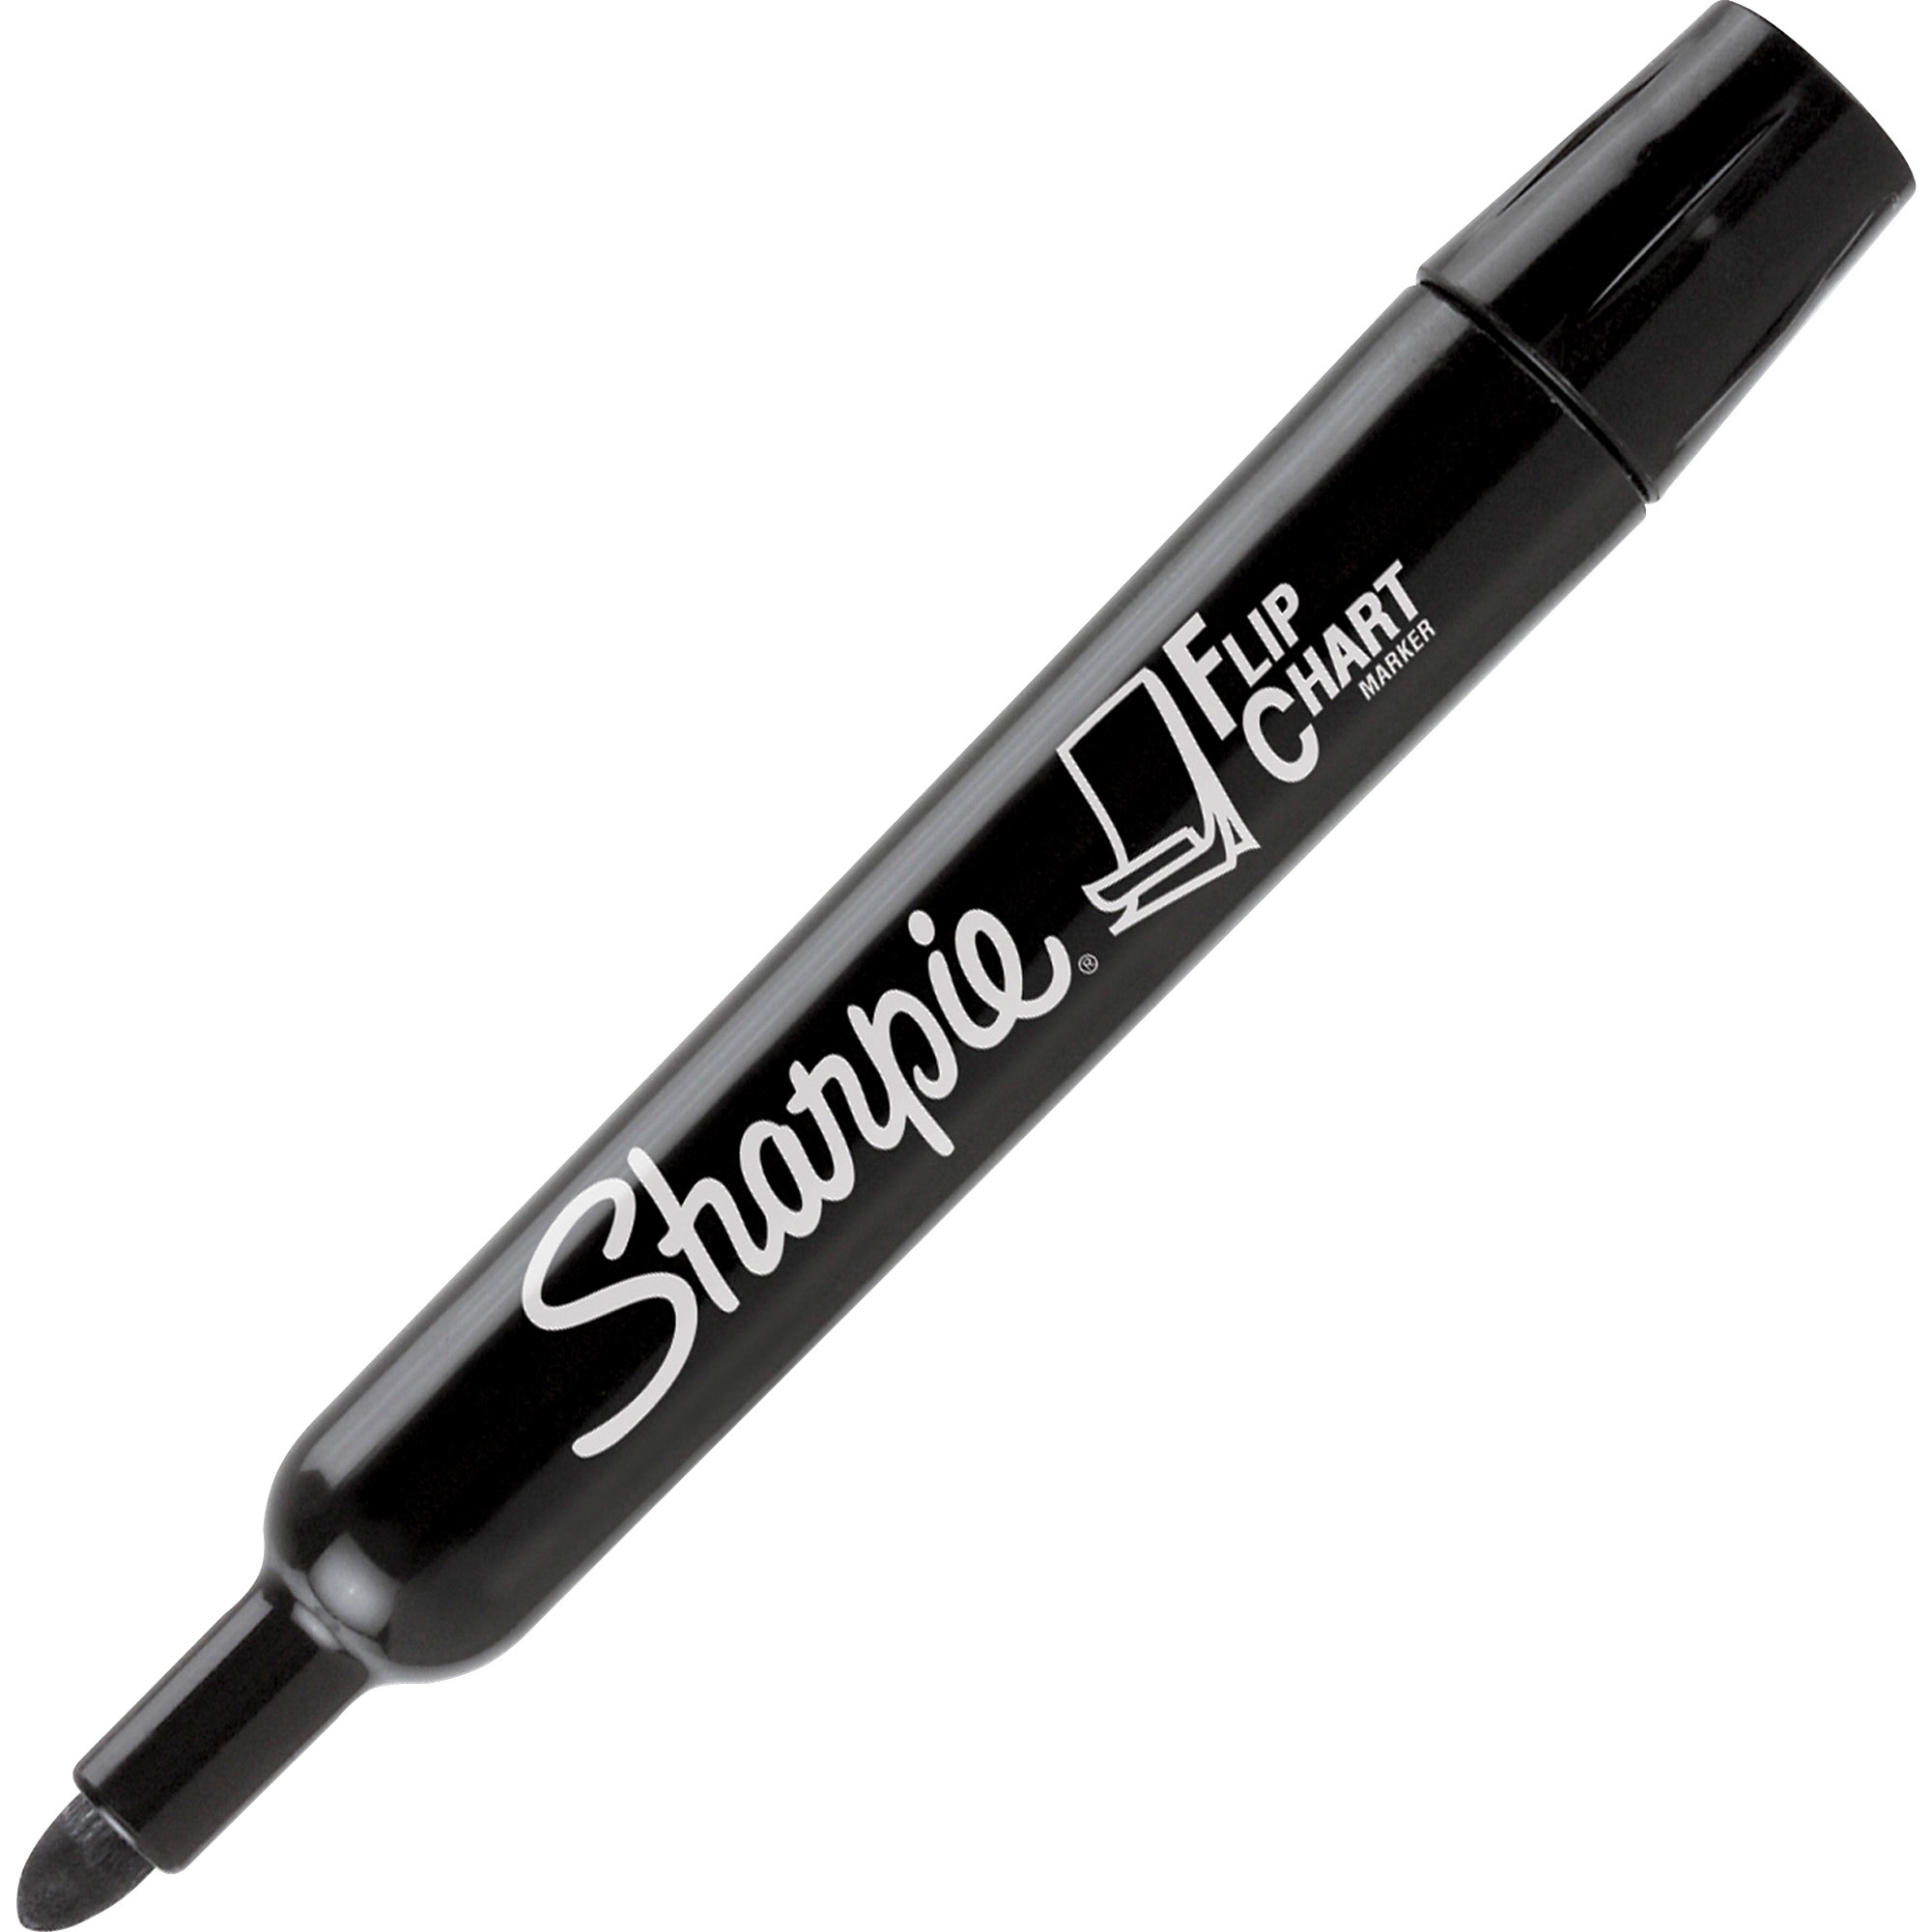 Case of 12 Packs of Flip Chart Sharpie Permanent Markers Box of 8 (22478) 